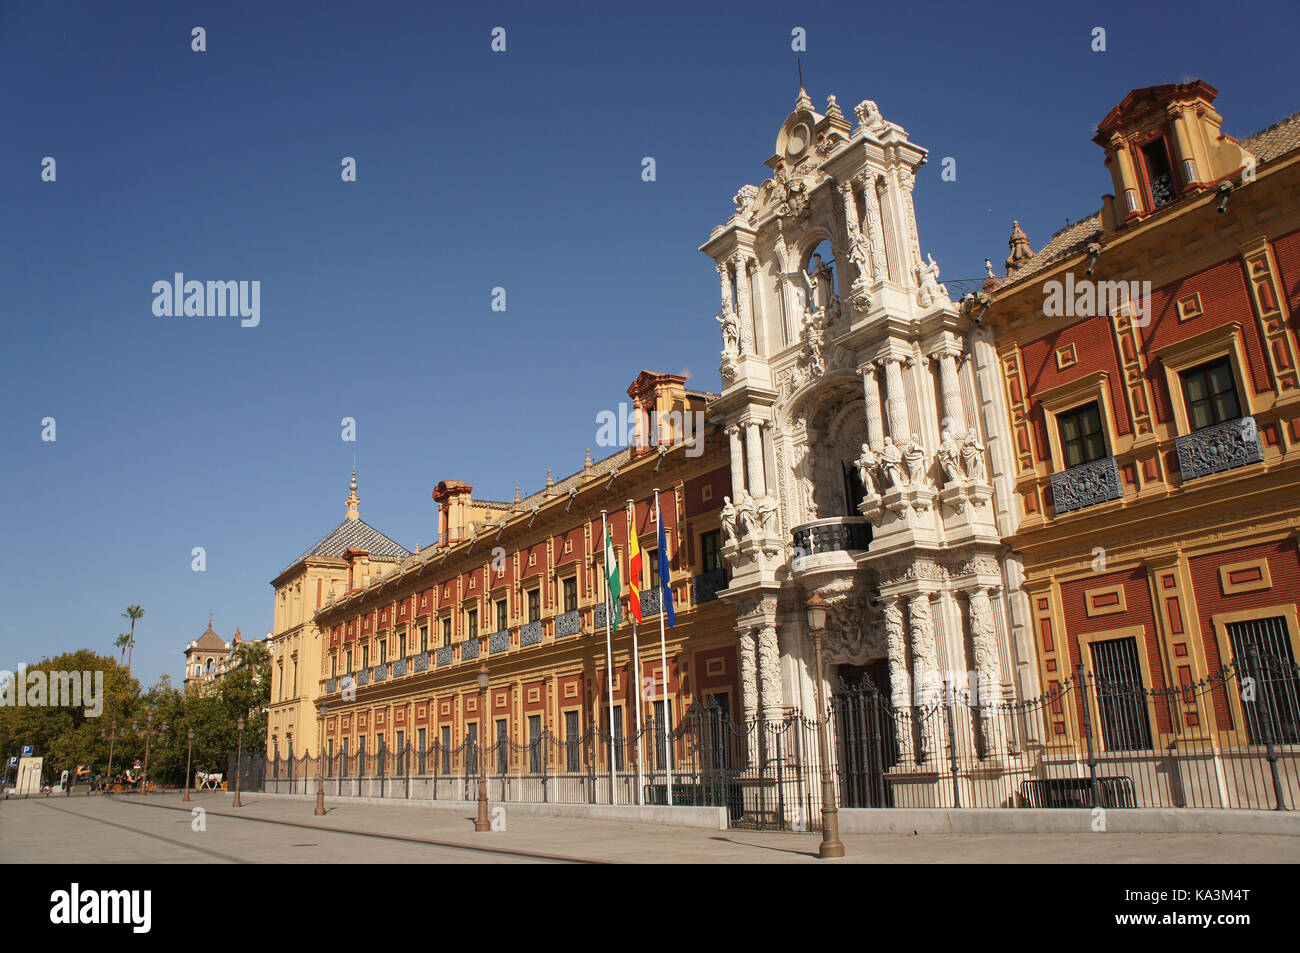 Facade of the Palace of San Telmo in Seville, Spain Stock Photo